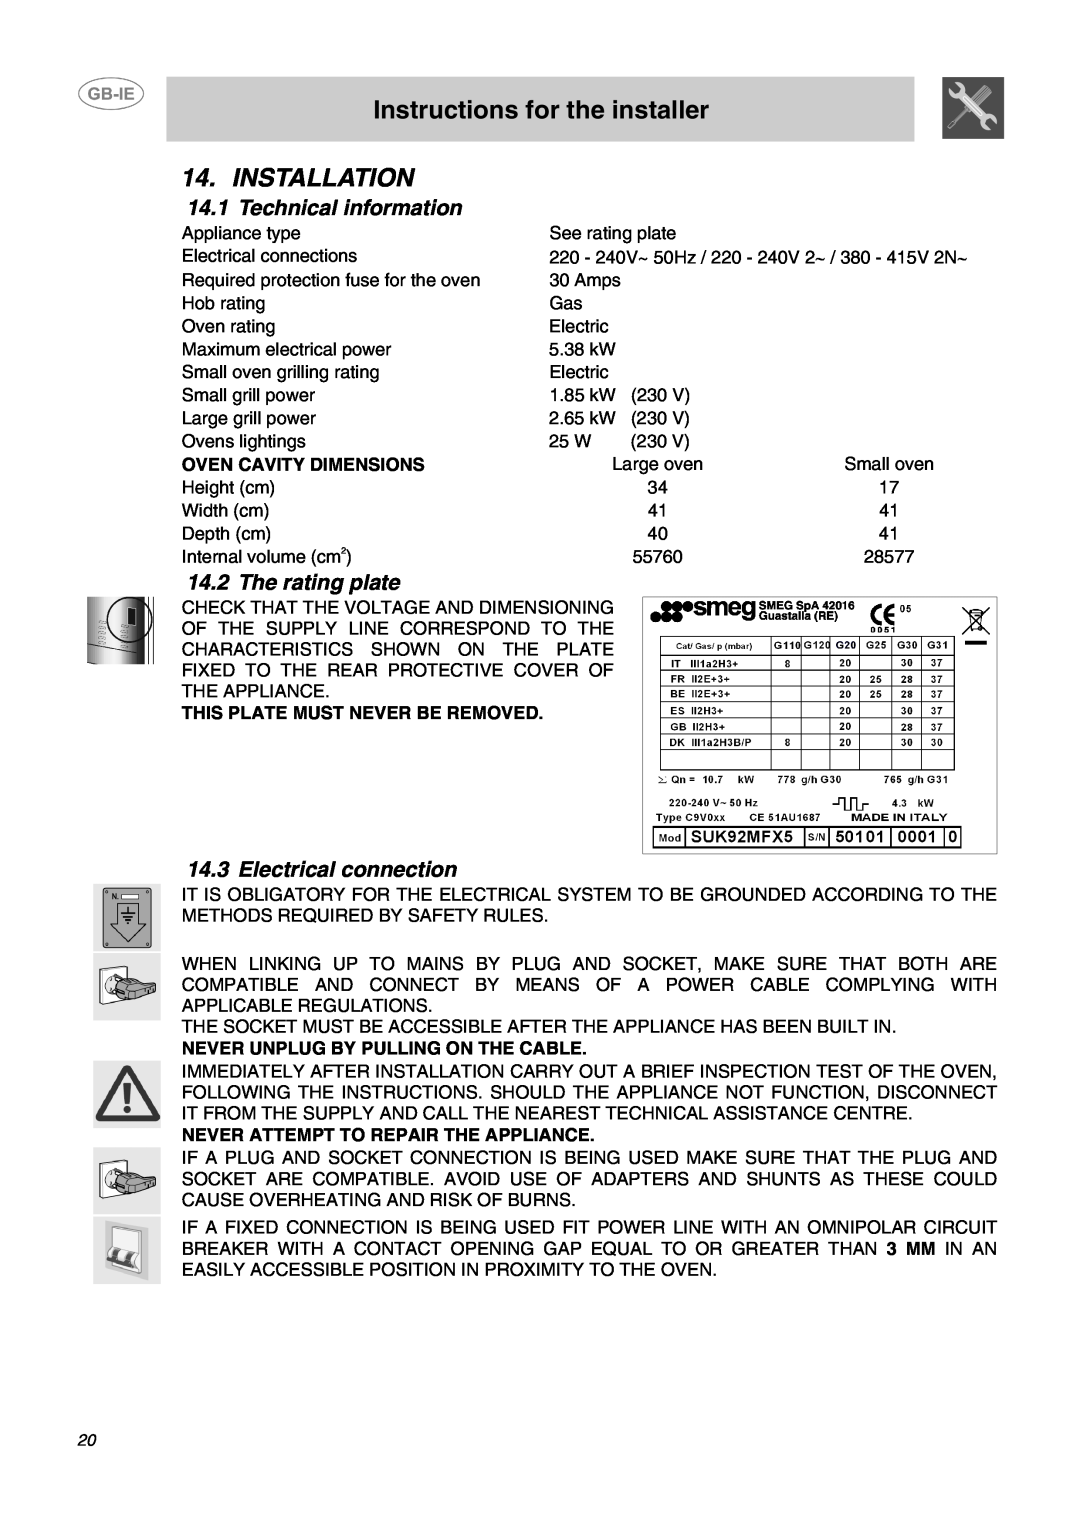 Smeg CC62MFX5 Instructions for the installer, Installation, Technical information, The rating plate, Electrical connection 